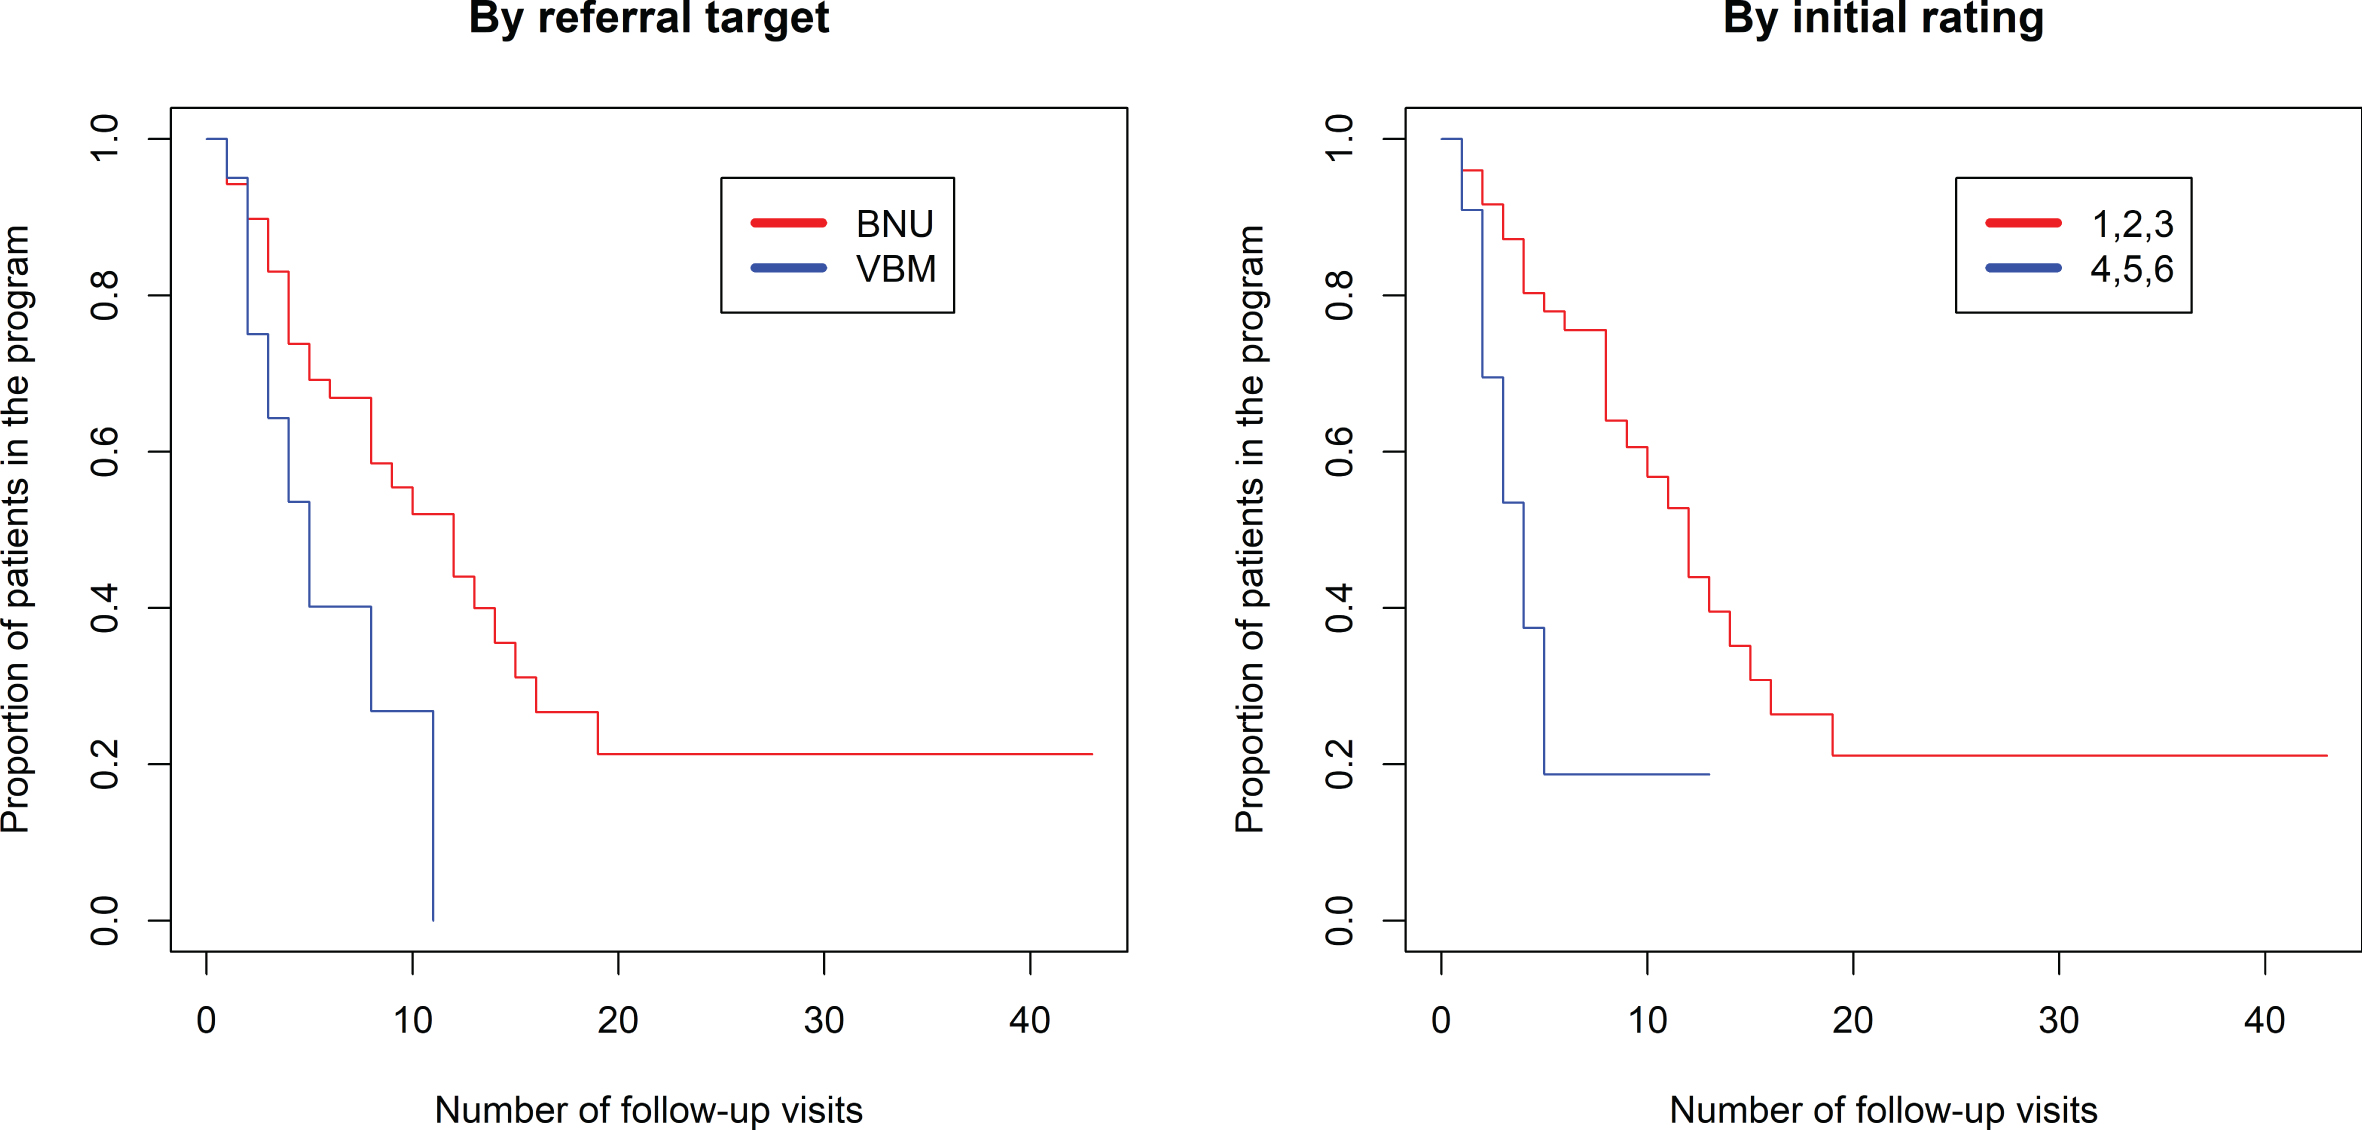 Kaplan-Meier estimated “survival” plot showing proportion of patients still in the program (rating 1 to 6) based on number of follow-up visits. Plot on left shows patients divided by referral to VBM alone (in blue) or VBM plus BNU (in red). Plot on right shows patients with initial severity rating of 1, 2, or 3 (in red) or 4, 5, or 6 (in blue).